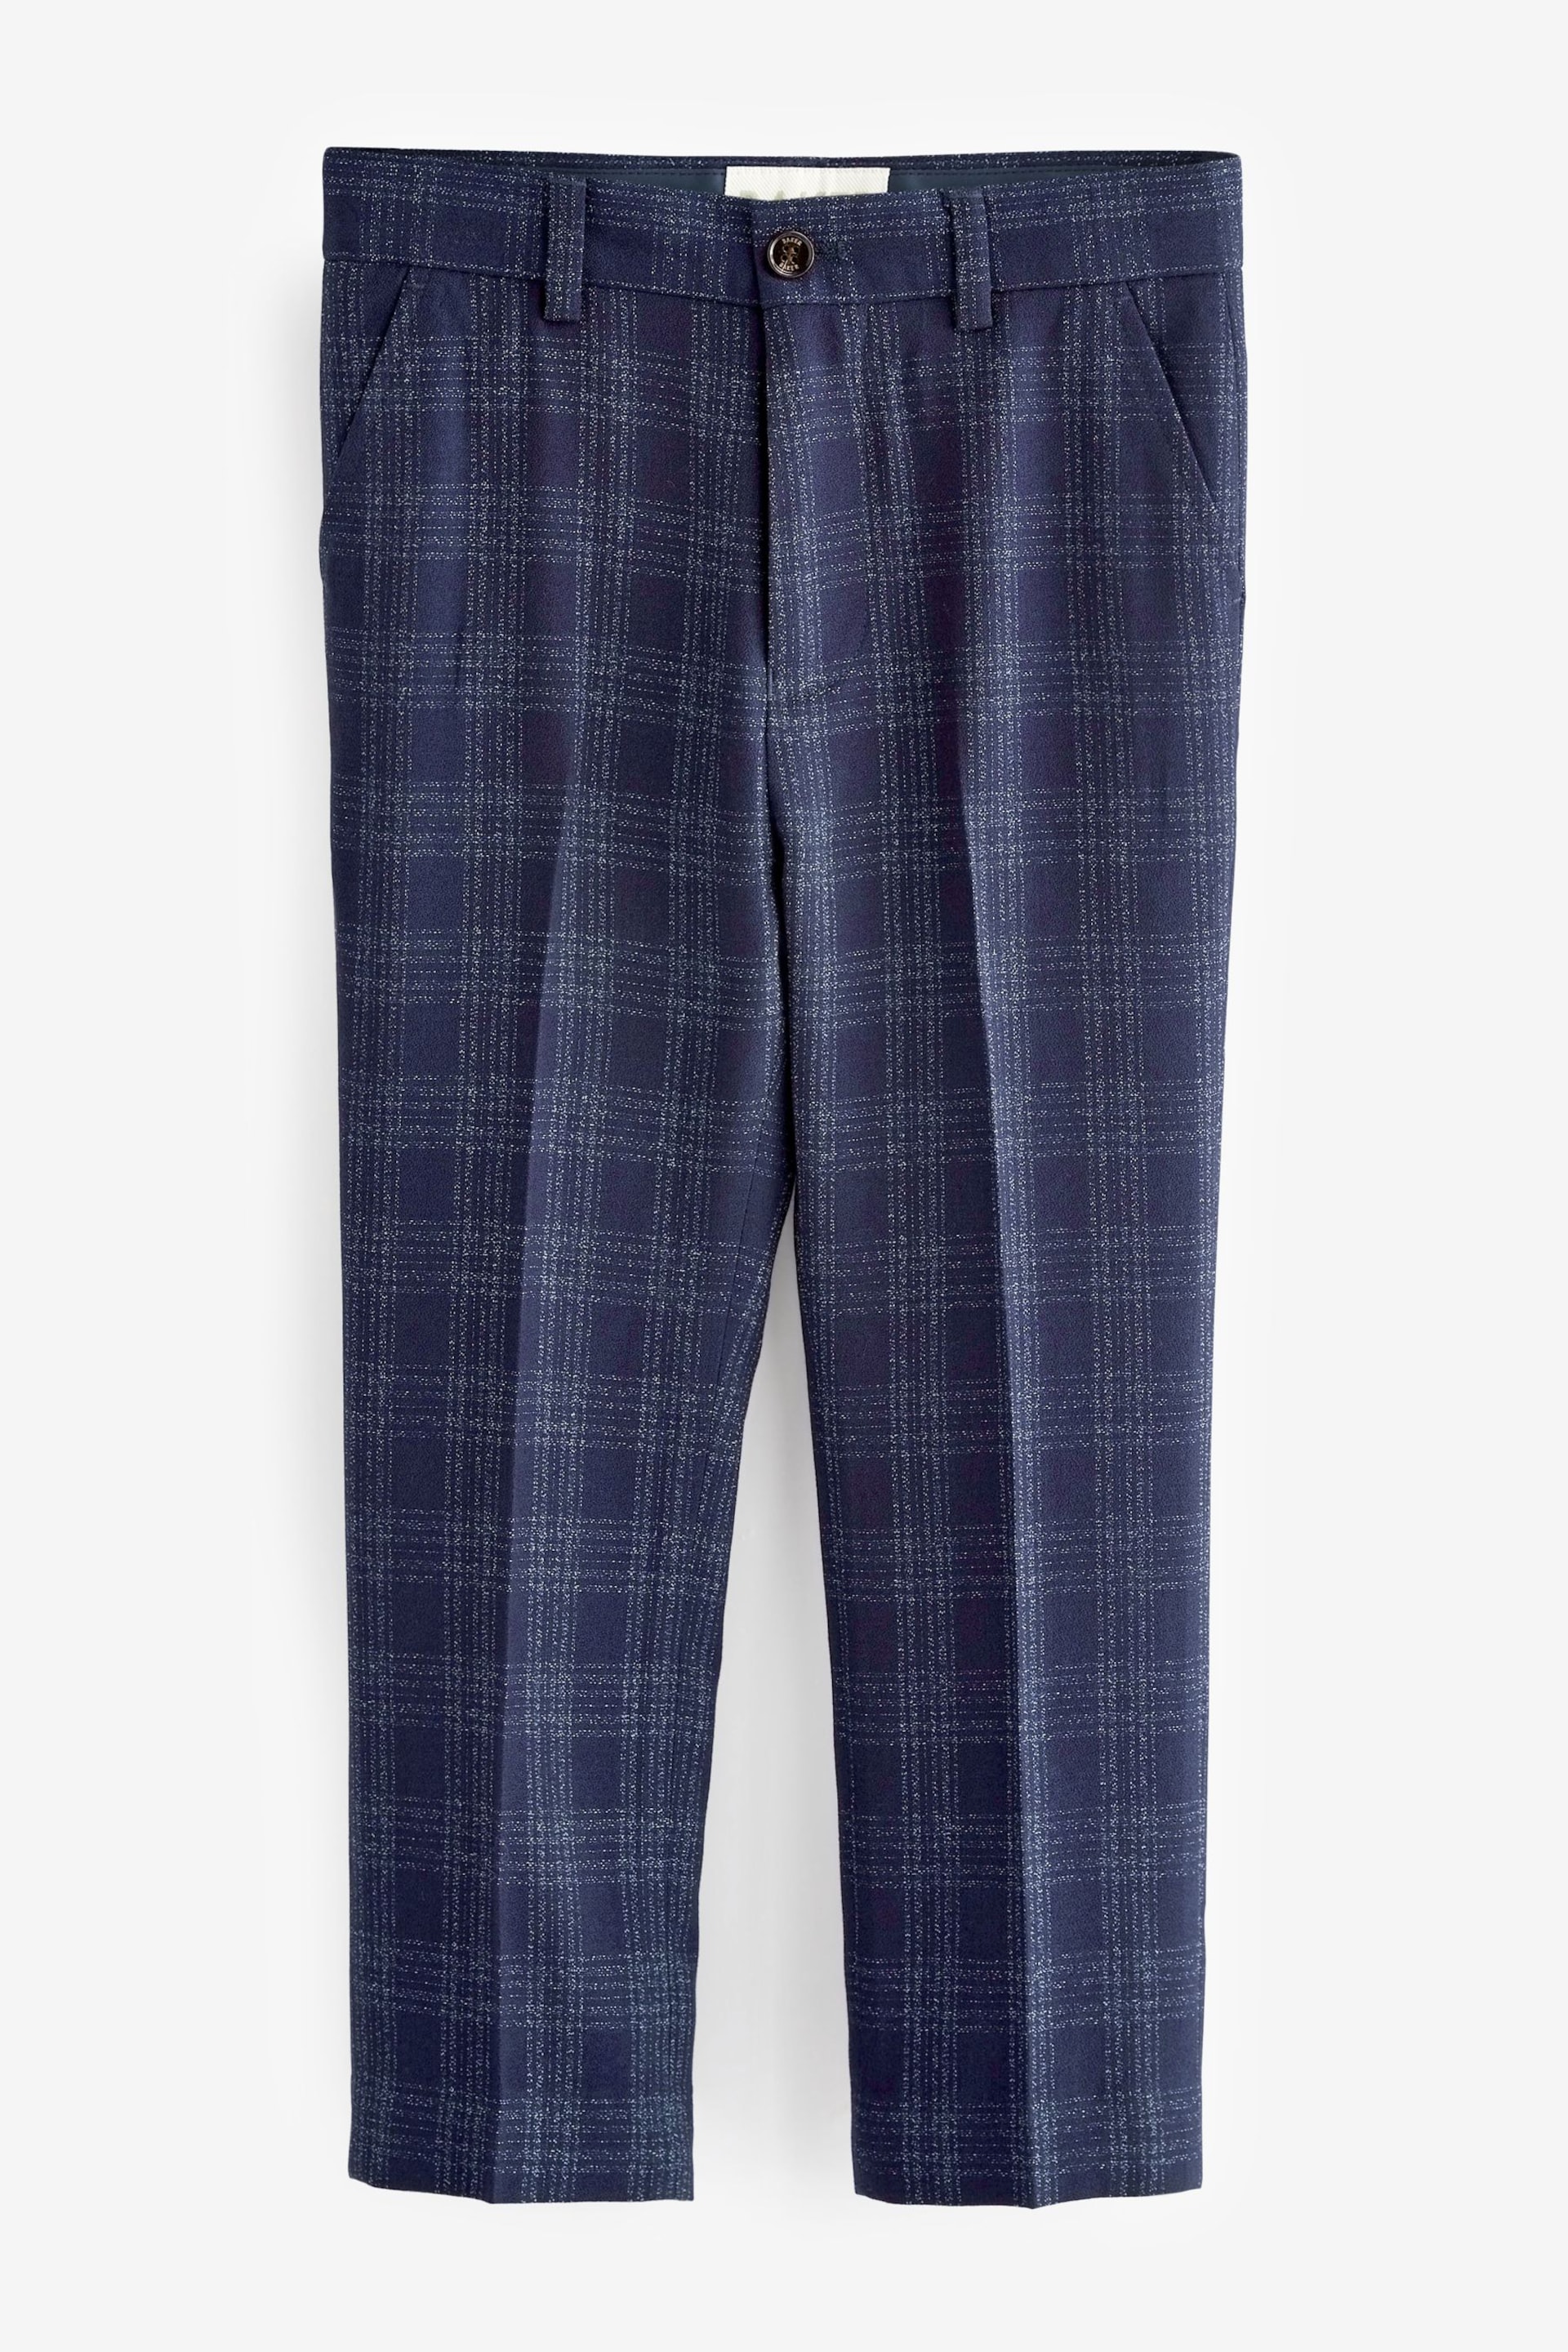 Baker by Ted Baker Suit Trousers - Image 5 of 8